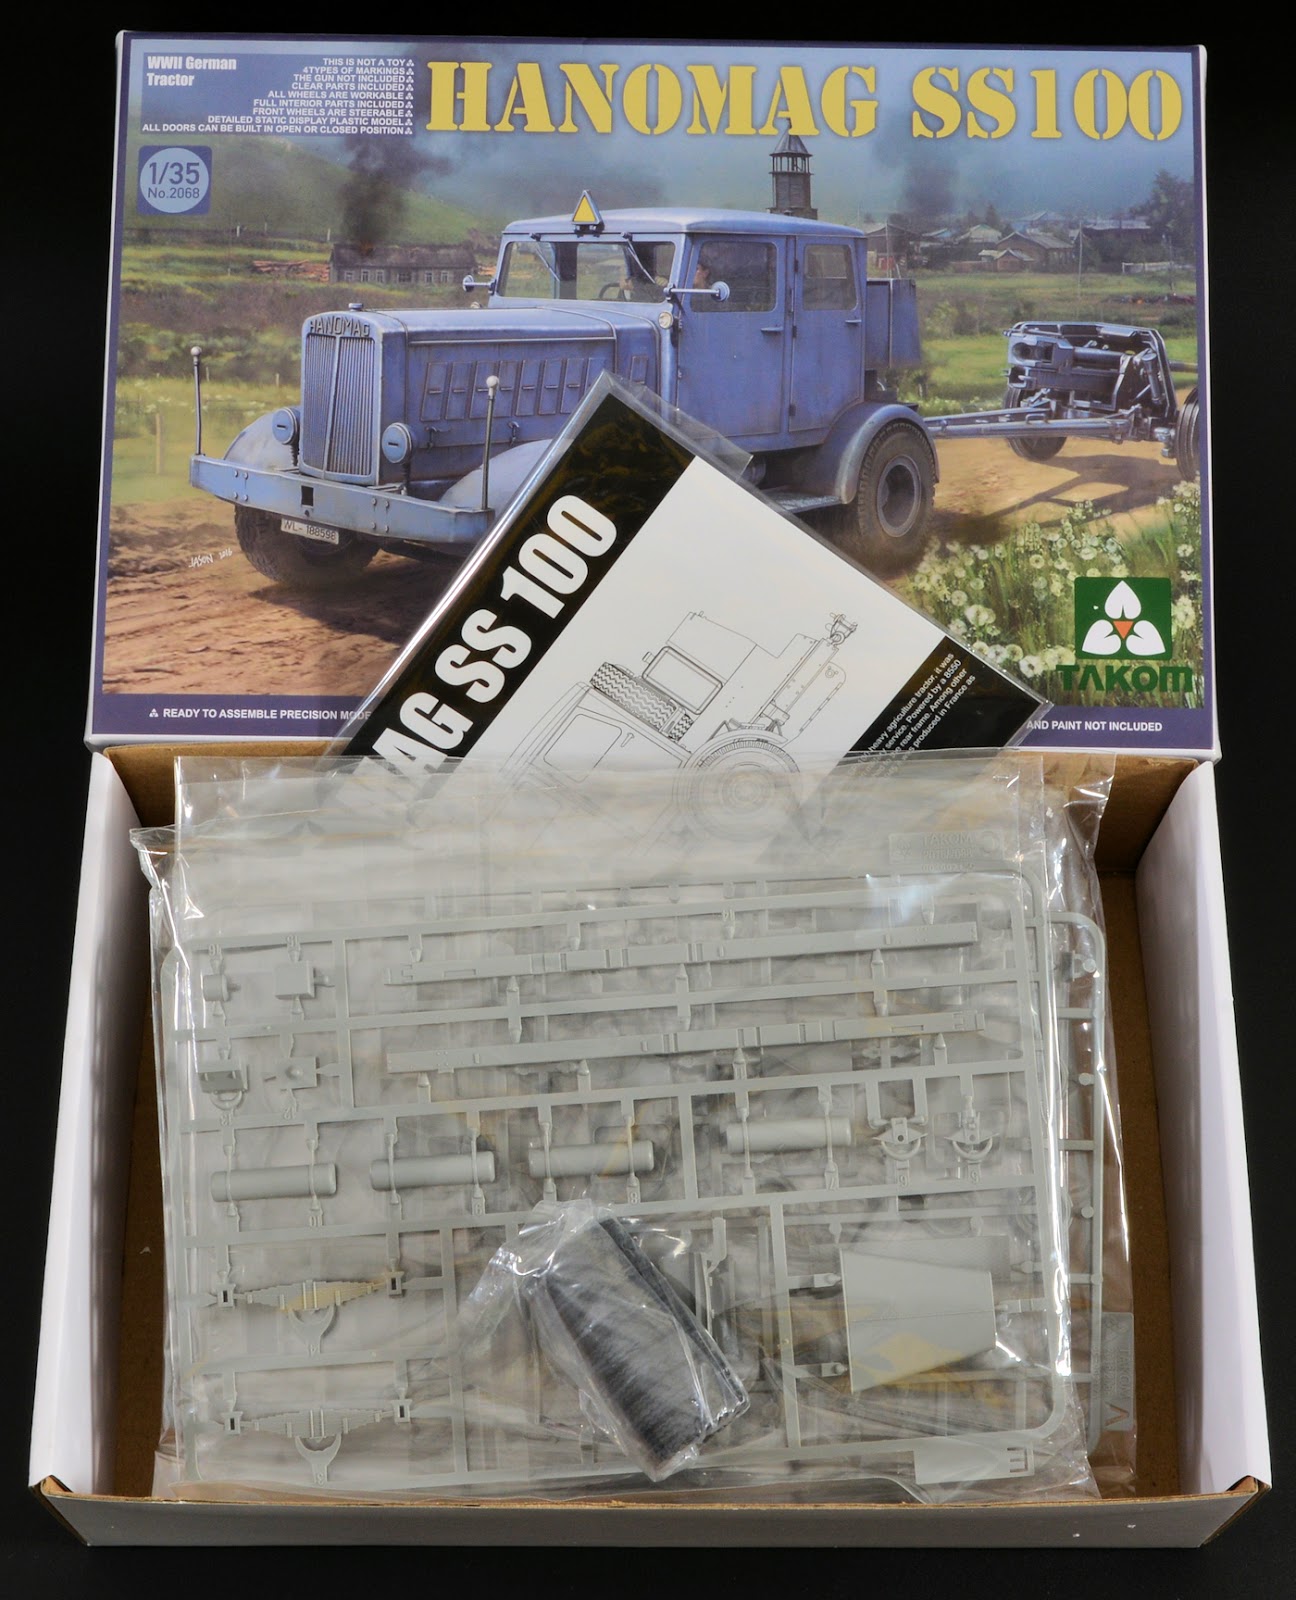 Details about   Miniature modelling railway hanomag ss 100 bub 1/87 oh promo show original title